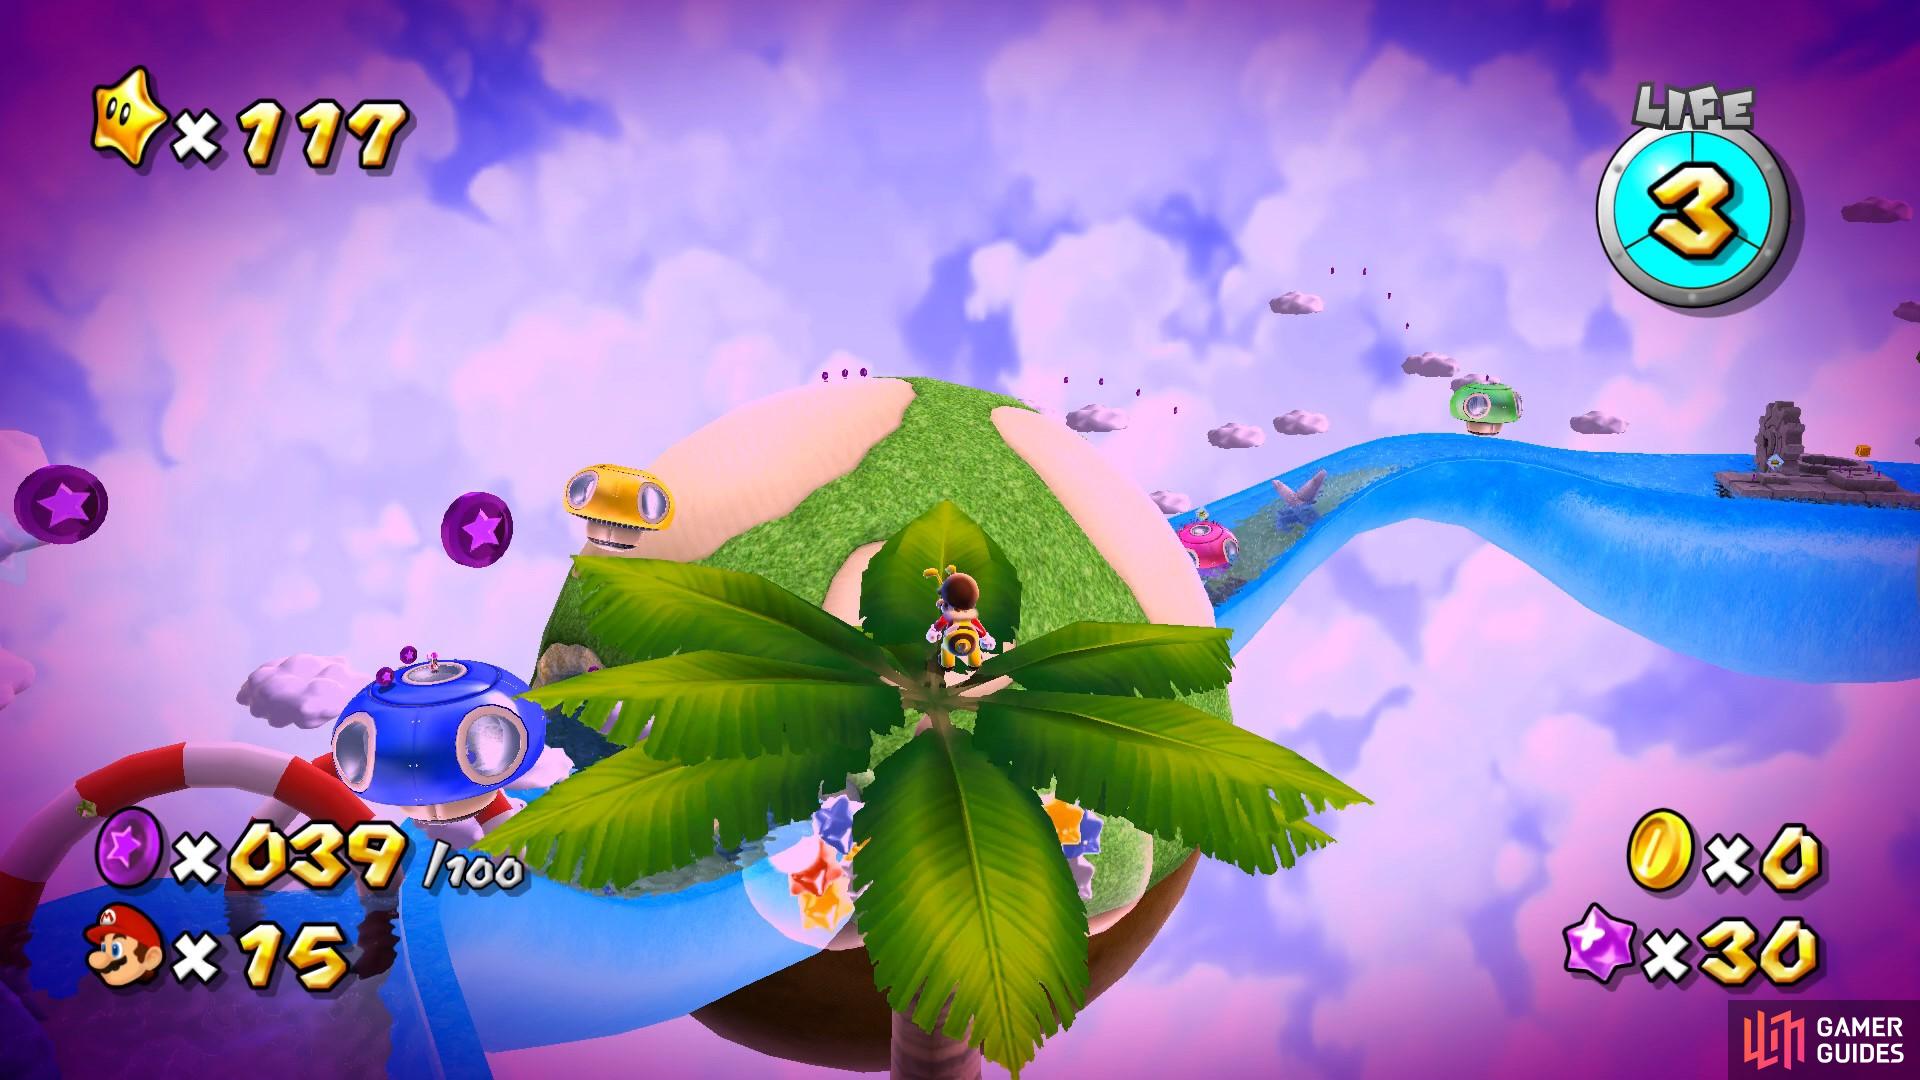 This level involves a lot of flying between clouds and palm trees.